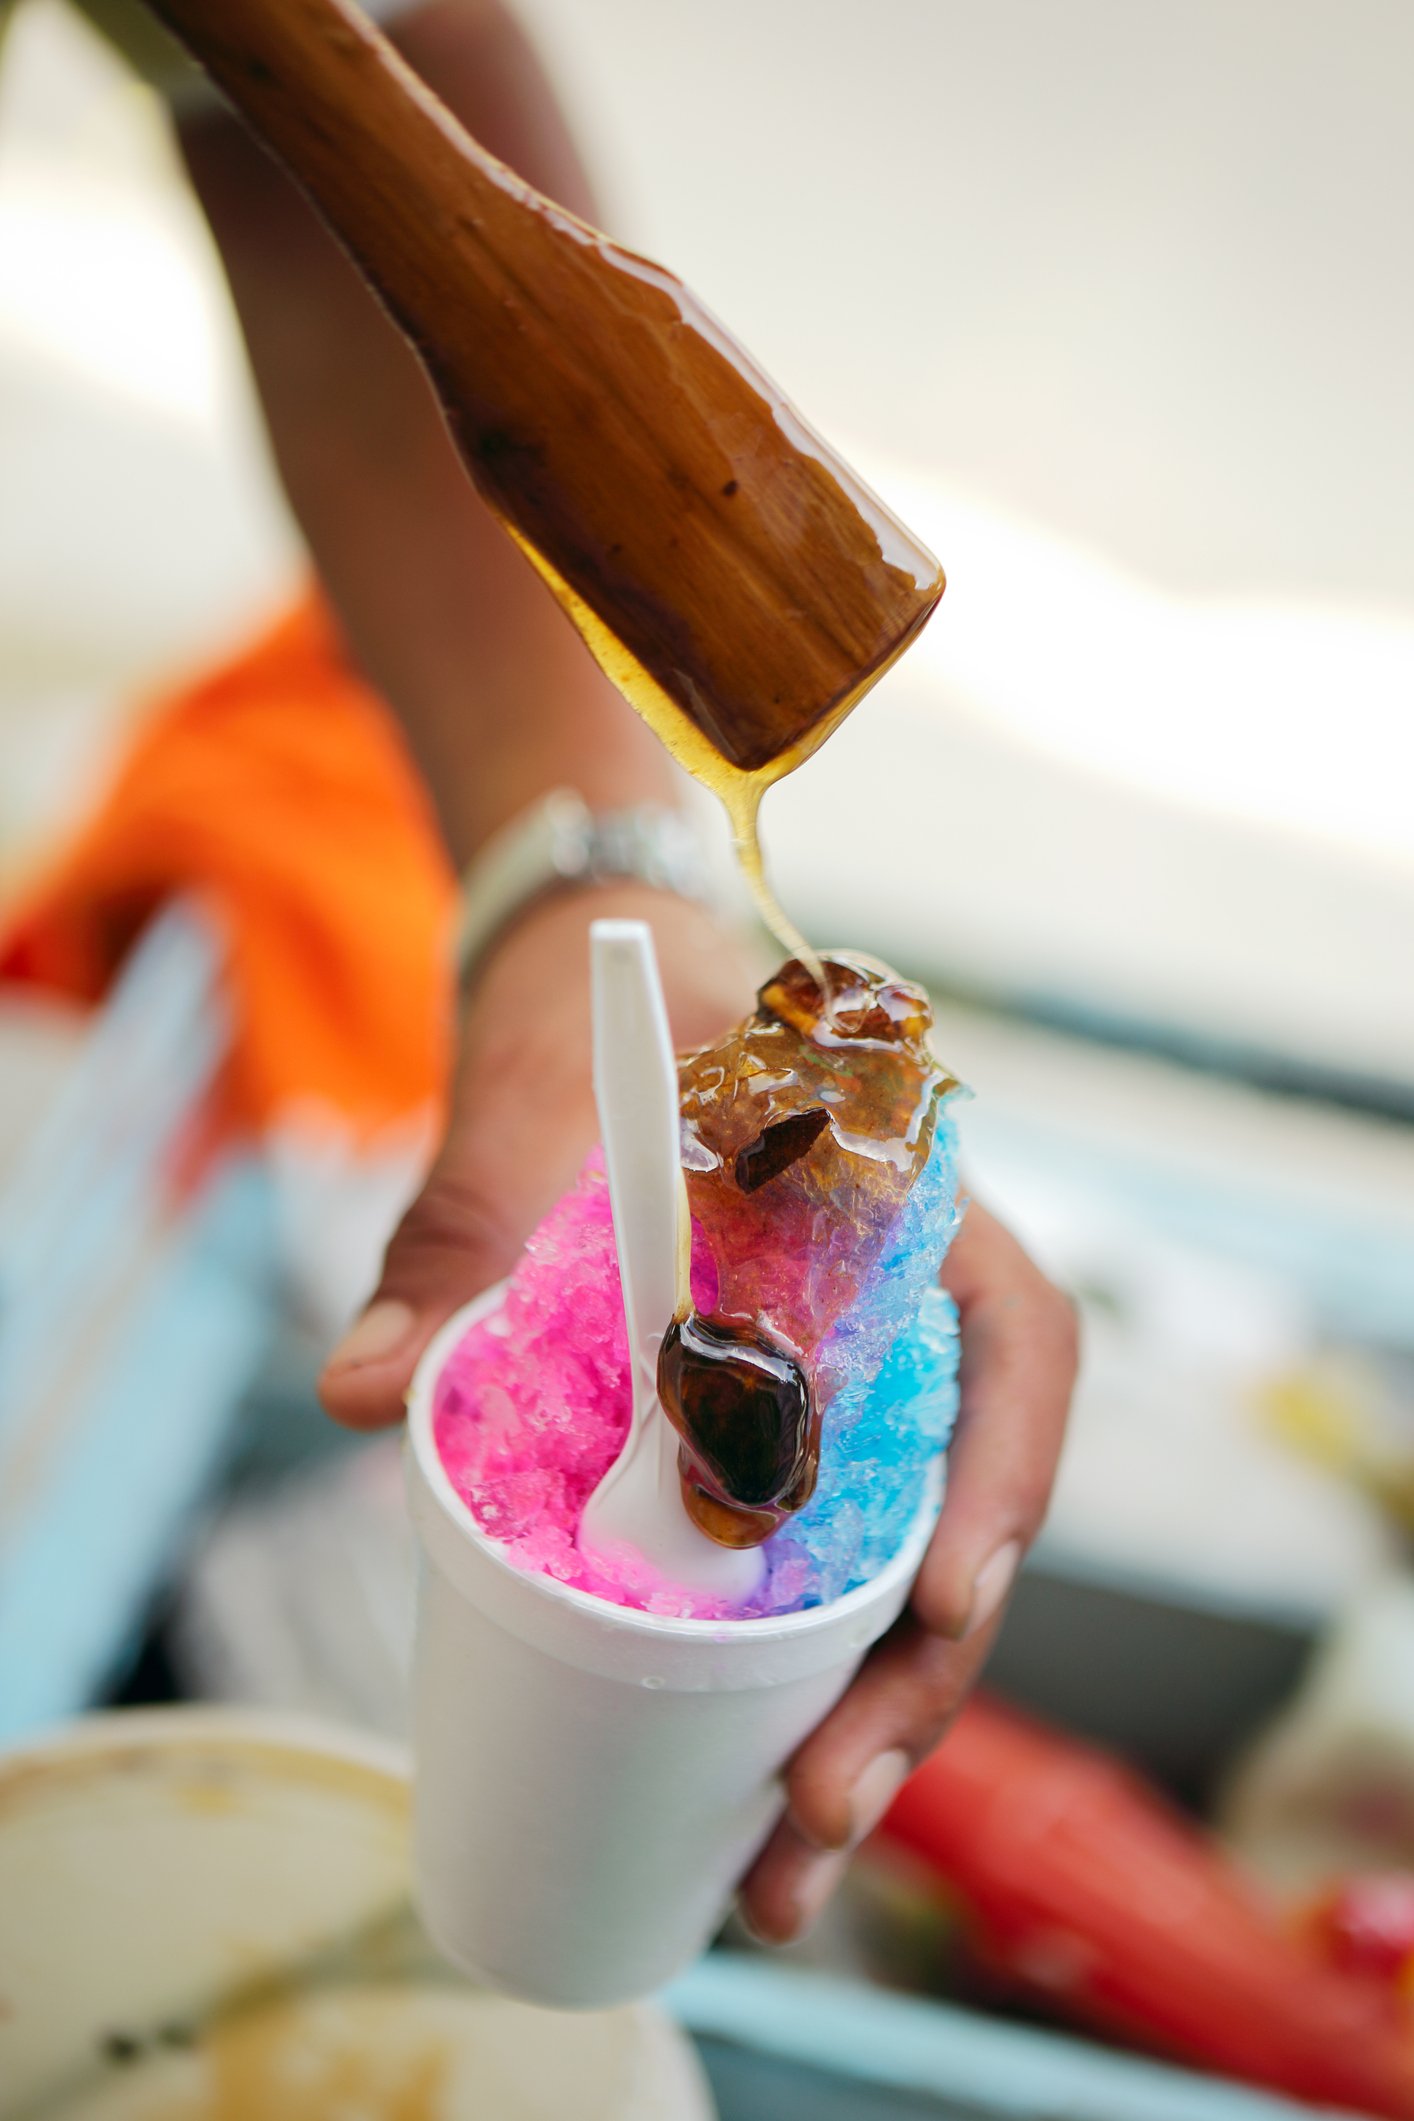 Shaved ice is popular all around the world. Pictured here is a typical Salvadoran 'Minuta' snow cone. (iStock Photo)